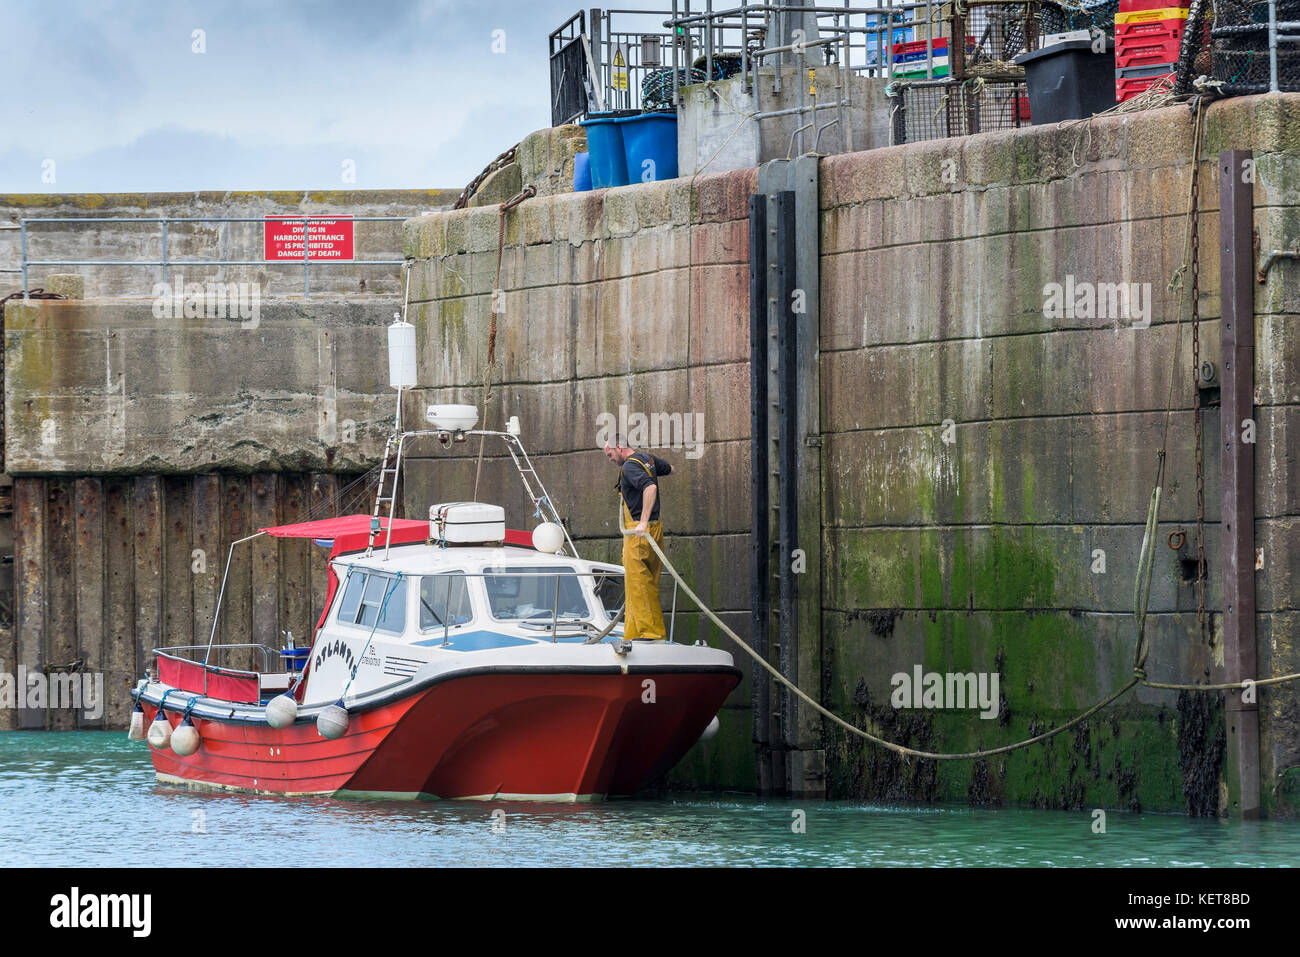 Newquay Harbour Cornwall - a boat being tied up at the quay at Newquay Harbour. Stock Photo